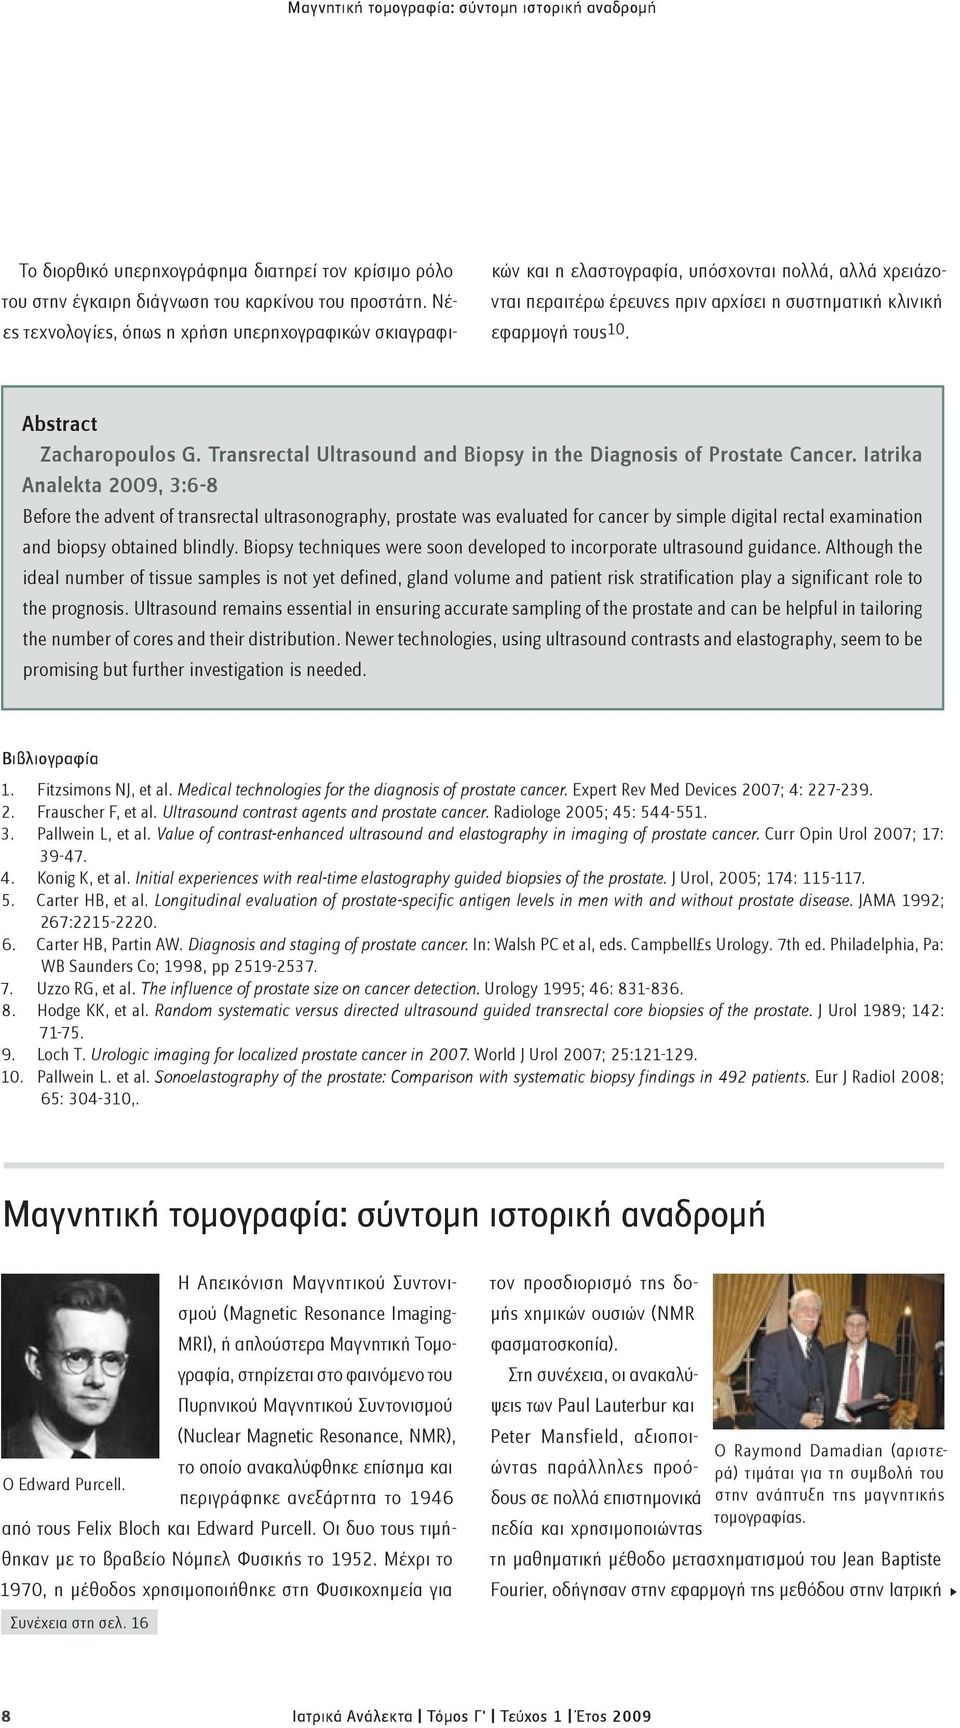 Abstract Zacharopoulos G. Trasrectal Ultrasoud ad Biopsy i the Diagosis of Prostate Cacer.